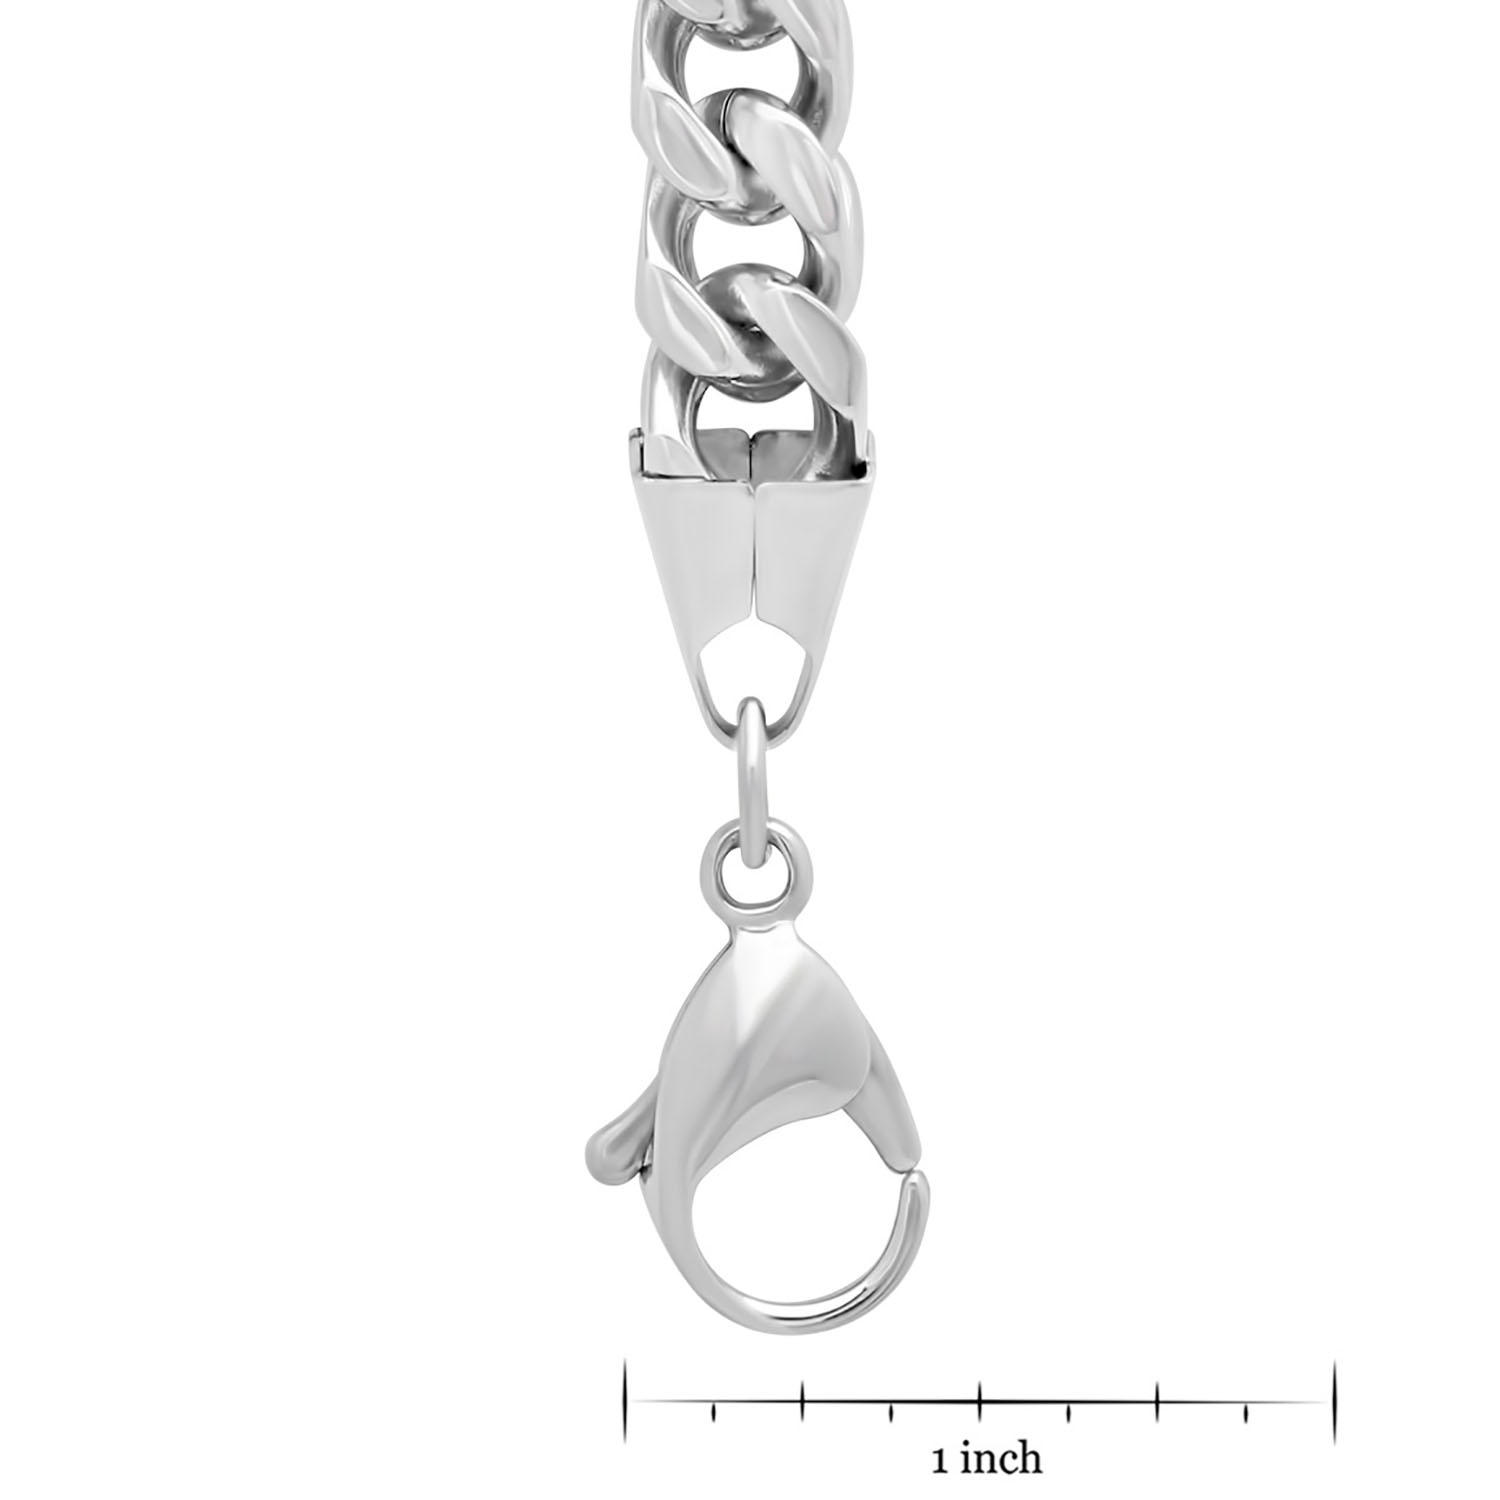 Lexzington - Home Of Prestigious Finds - Stainless Steel Link Chain and Bracelet Set